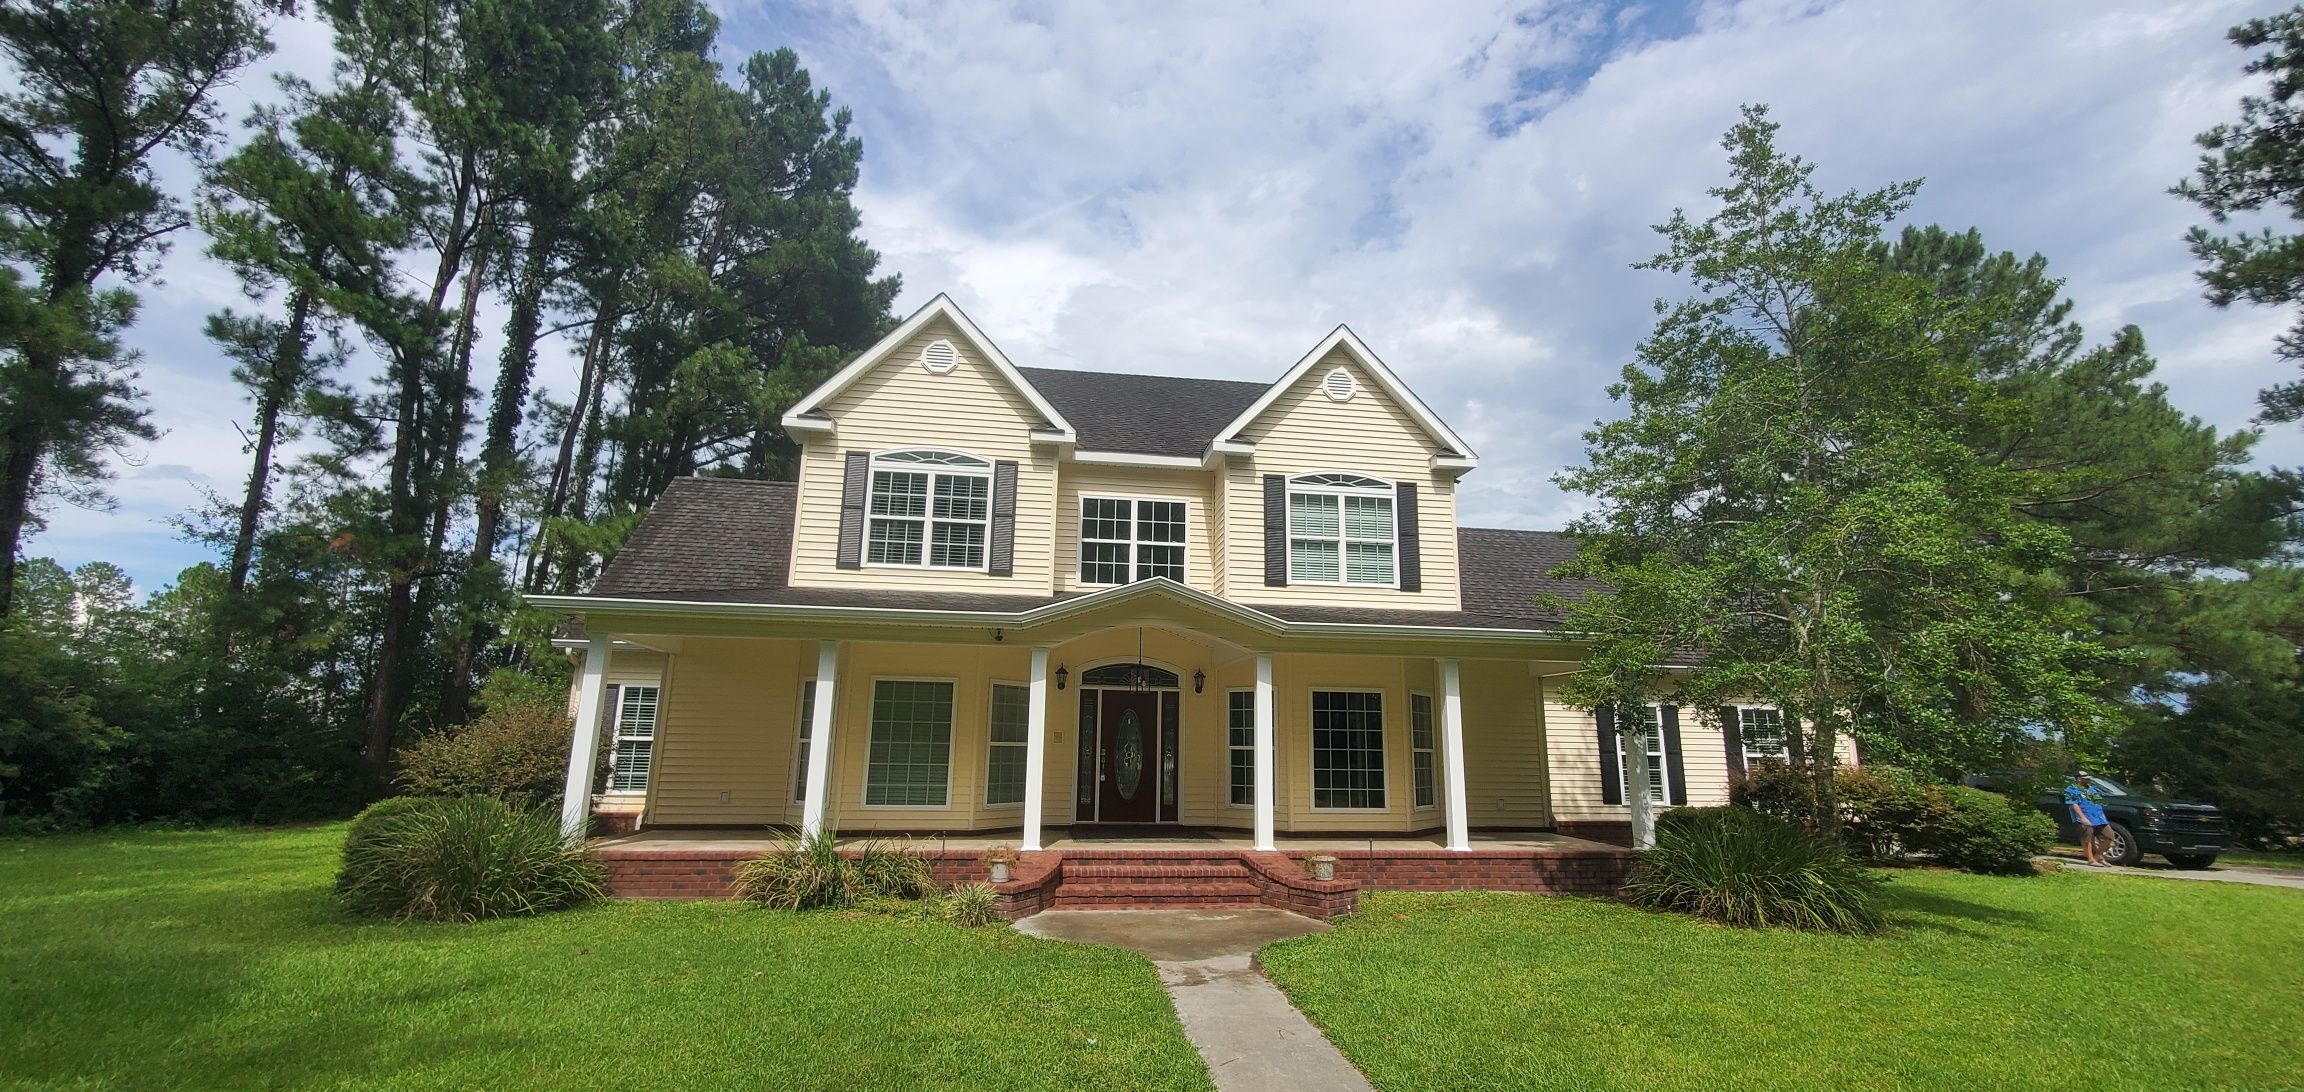 Our Best Work for Precision Exterior Services in Blackshear, GA